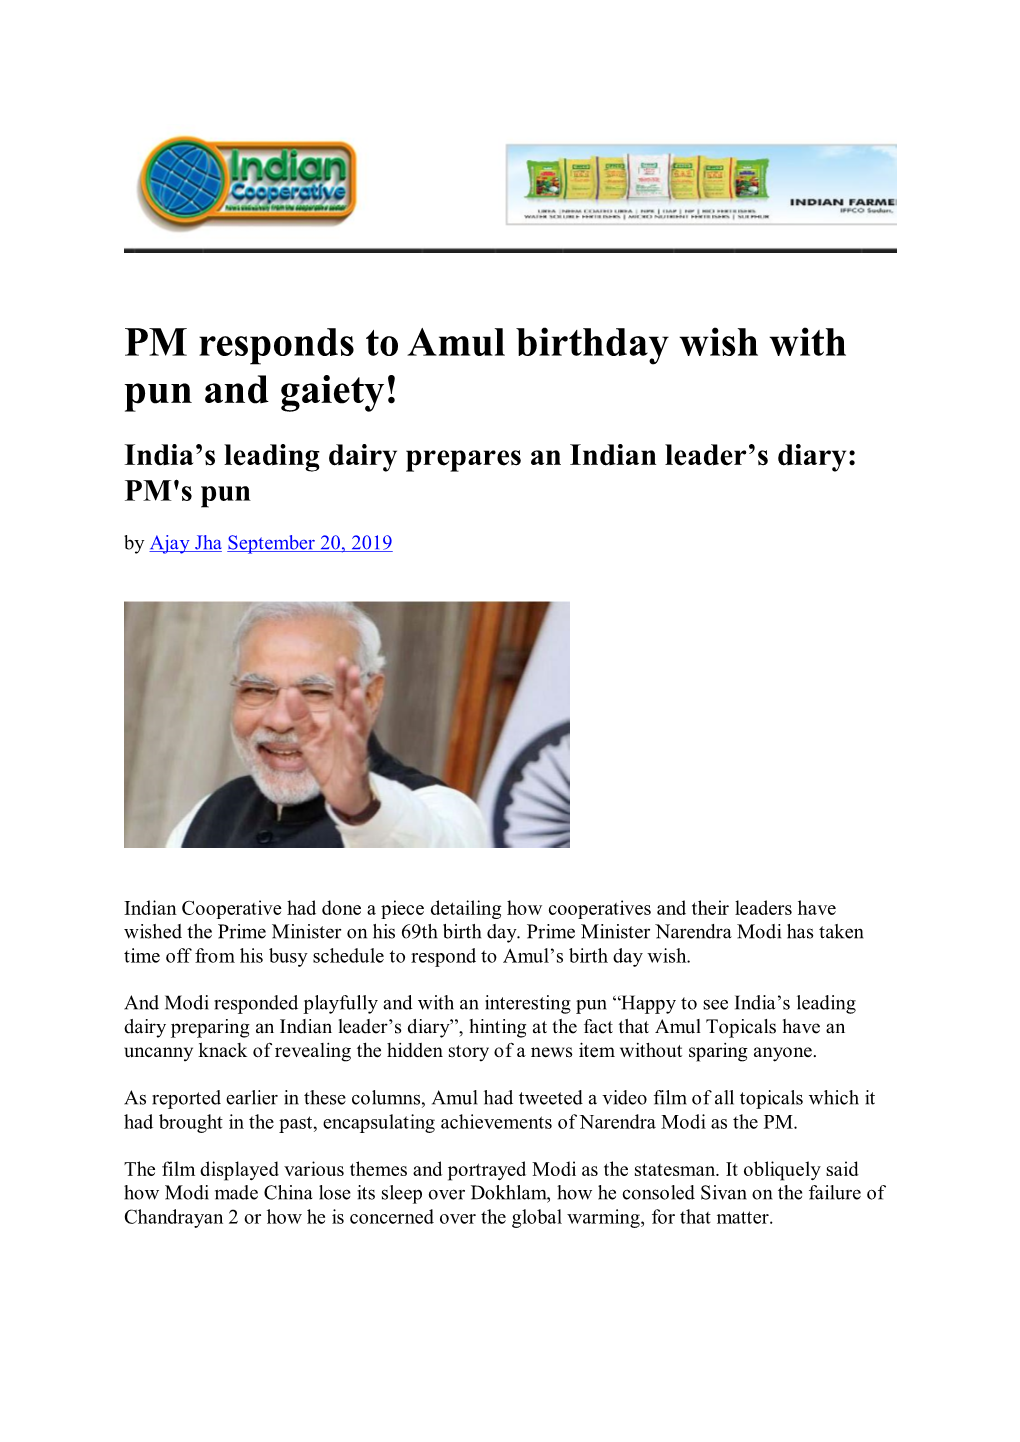 PM Responds to Amul Birthday Wish with Pun and Gaiety! India’S Leading Dairy Prepares an Indian Leader’S Diary: PM's Pun by Ajay Jha September 20, 2019